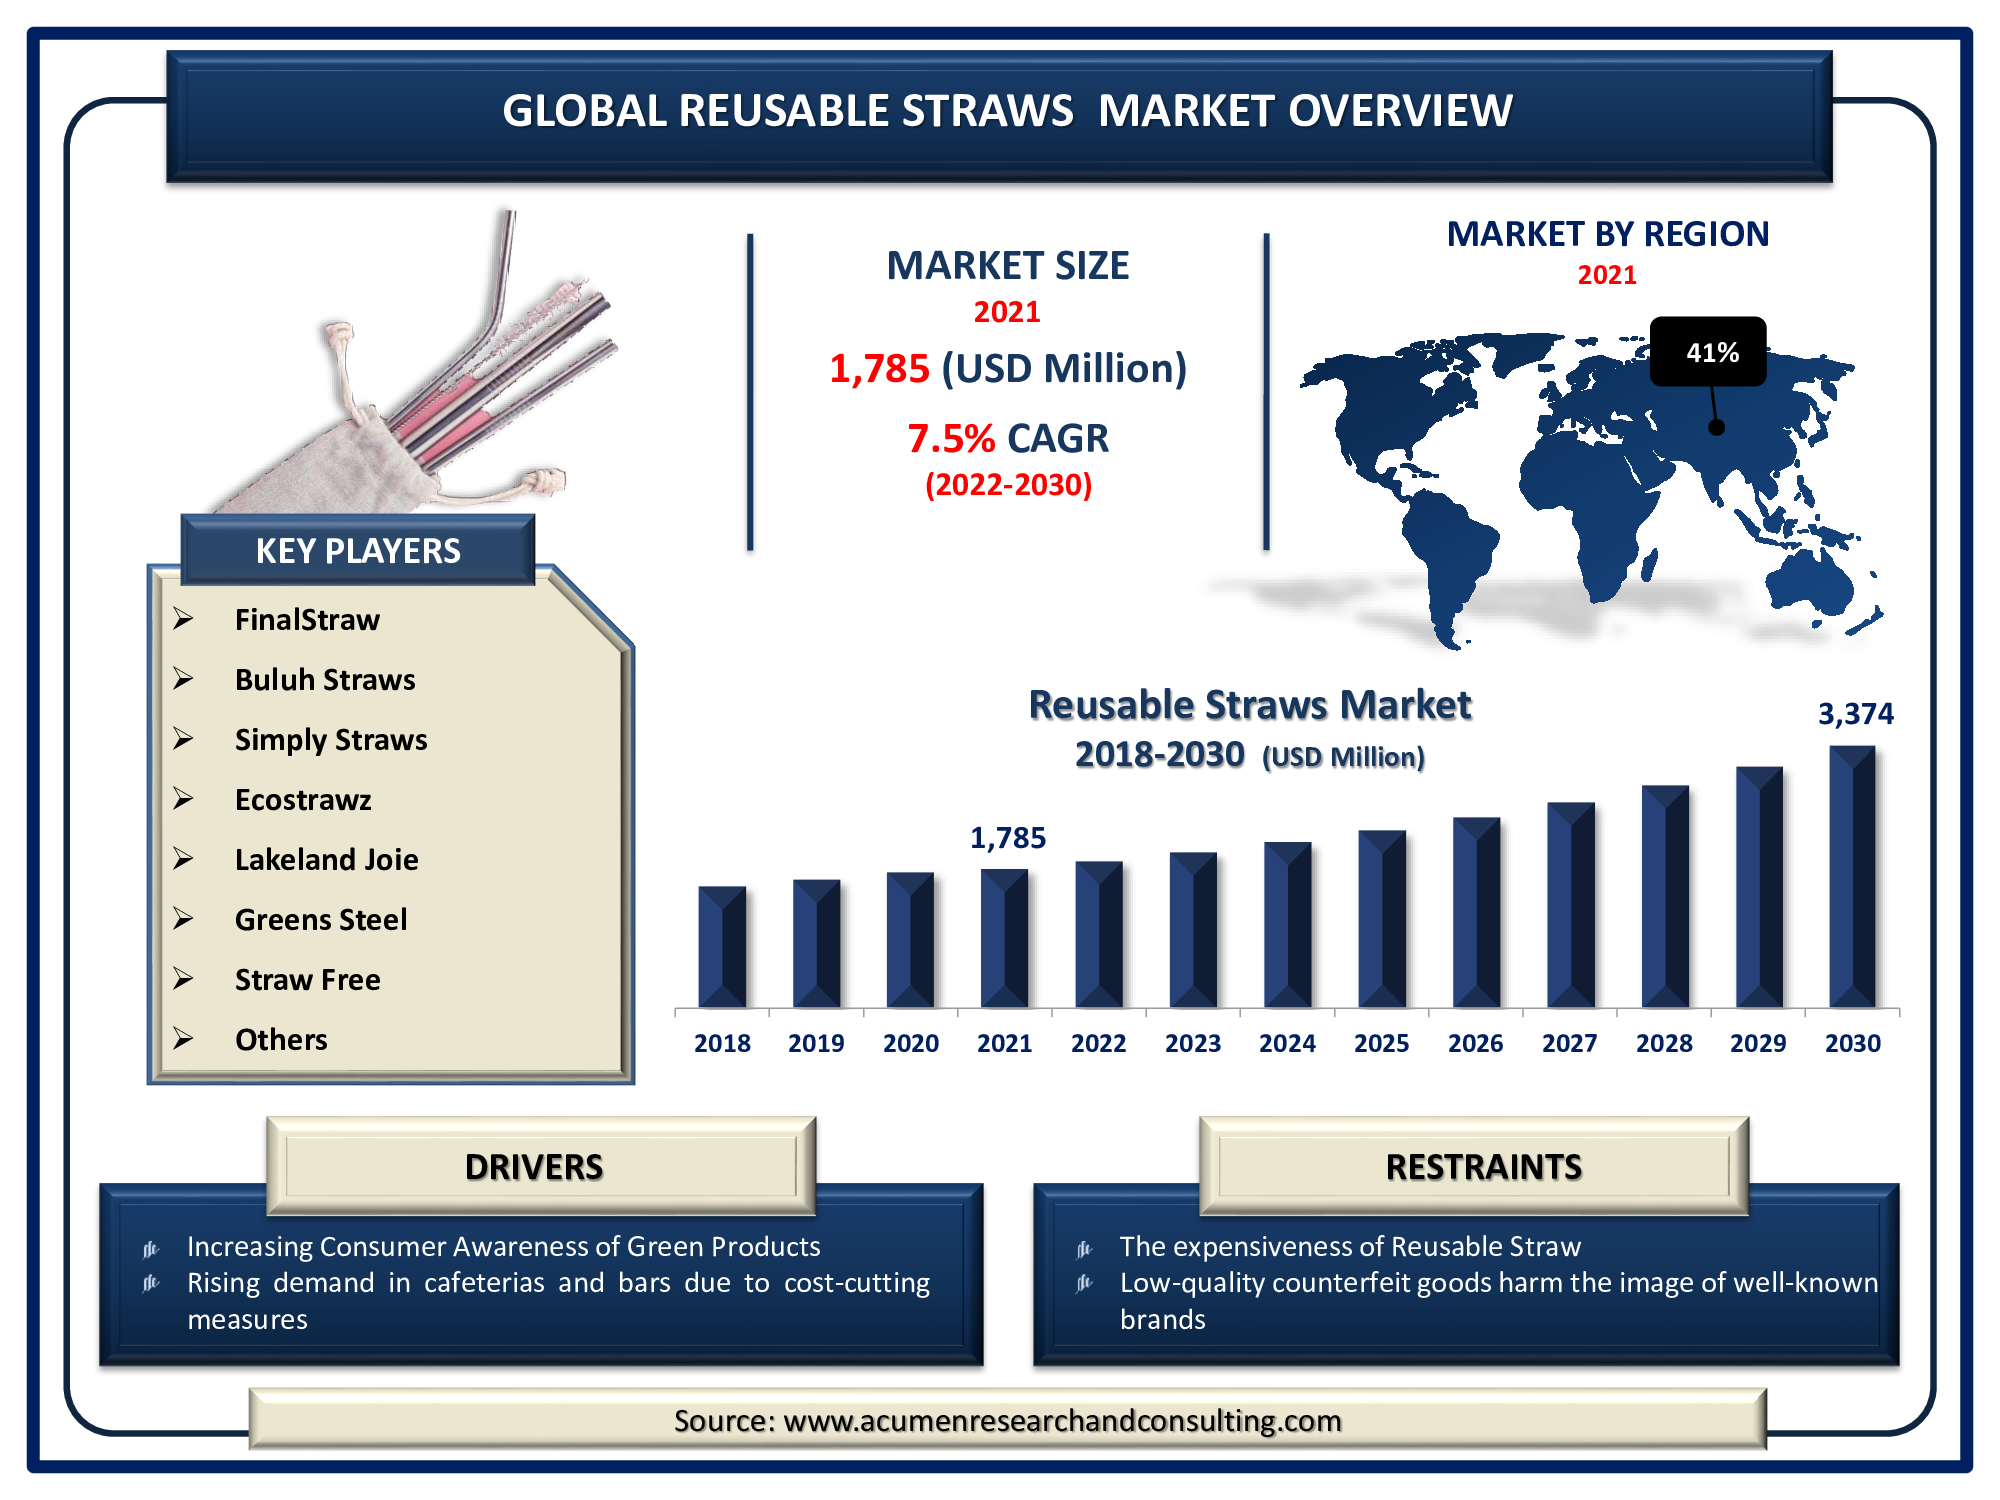 https://www.acumenresearchandconsulting.com/reportimages/Key-Drivers-Reusable-Straws-Market.png